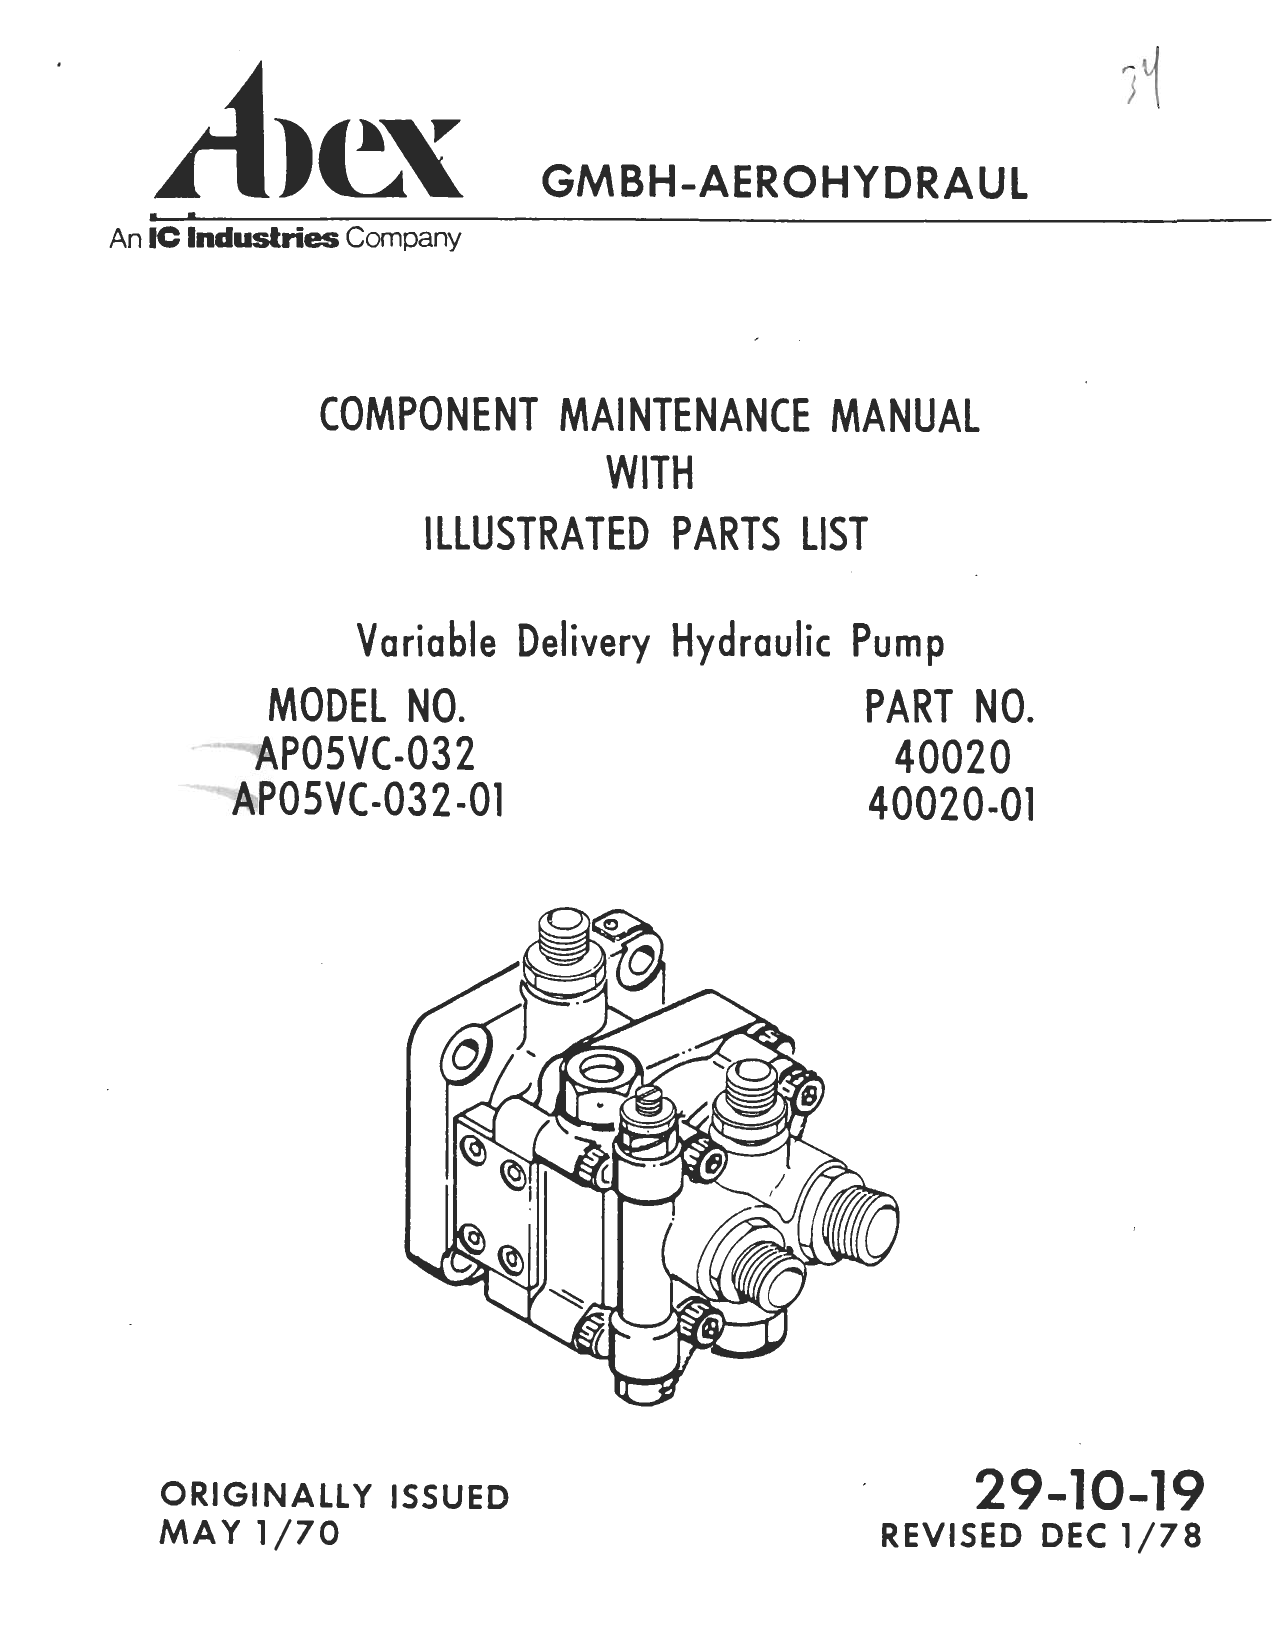 Sample page 1 from AirCorps Library document: Maintenance Manual with Illustrated Parts List for Variable Delivery Hydraulic Pump - Model AP05VC-032 and AP05VC-032-01